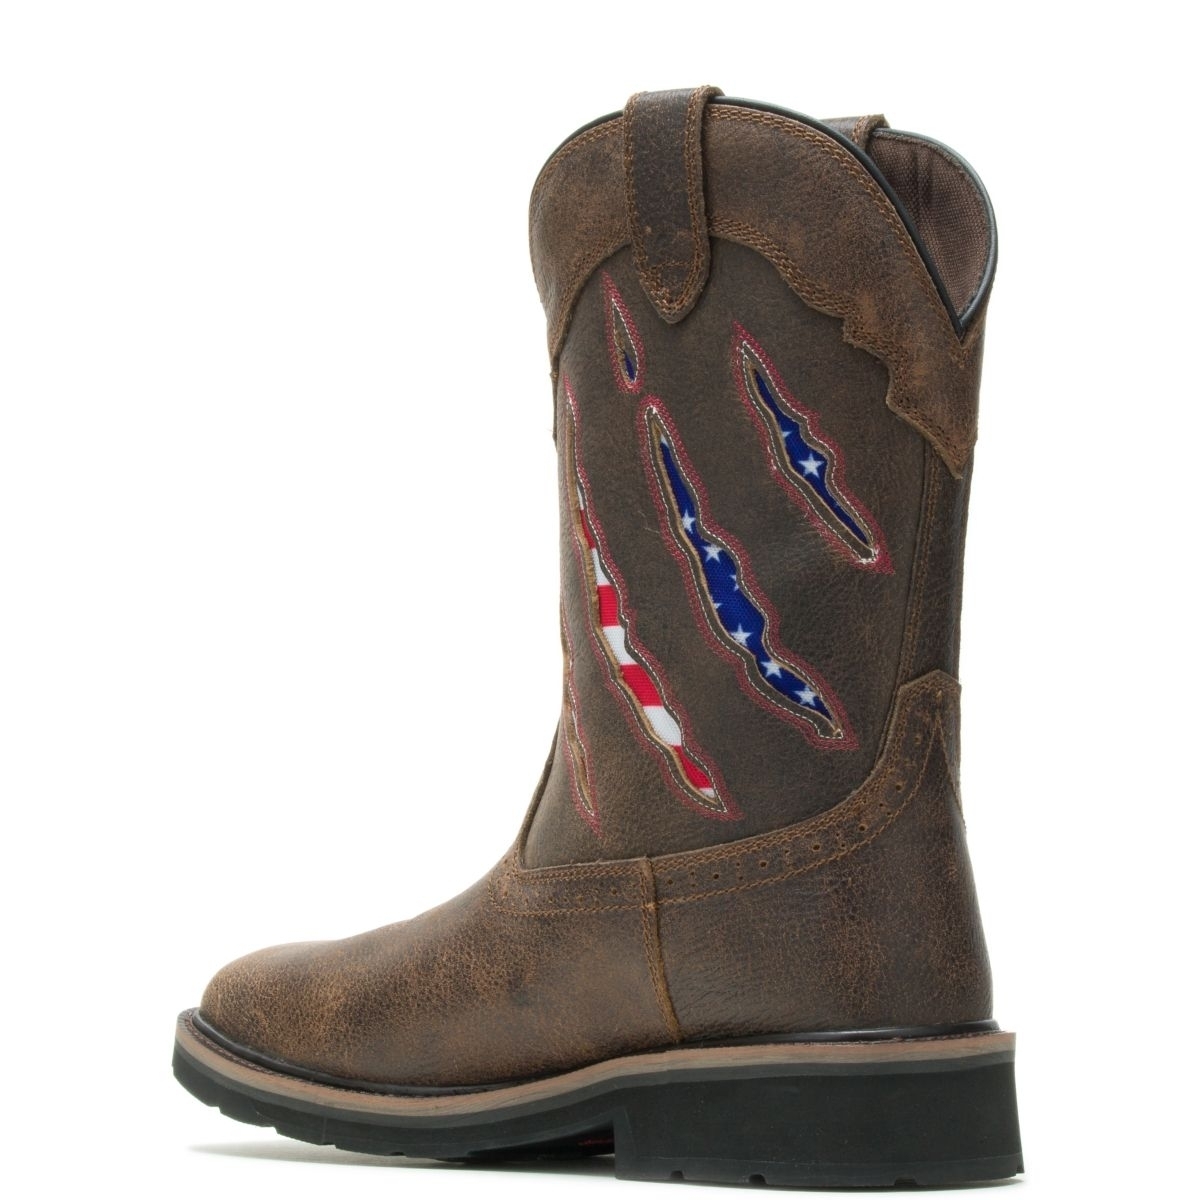 WOLVERINE Men's Rancher Claw Wellington Soft Toe Work Boot Brown/Flag - W200138 Flag/brown - Flag/brown, 9.5